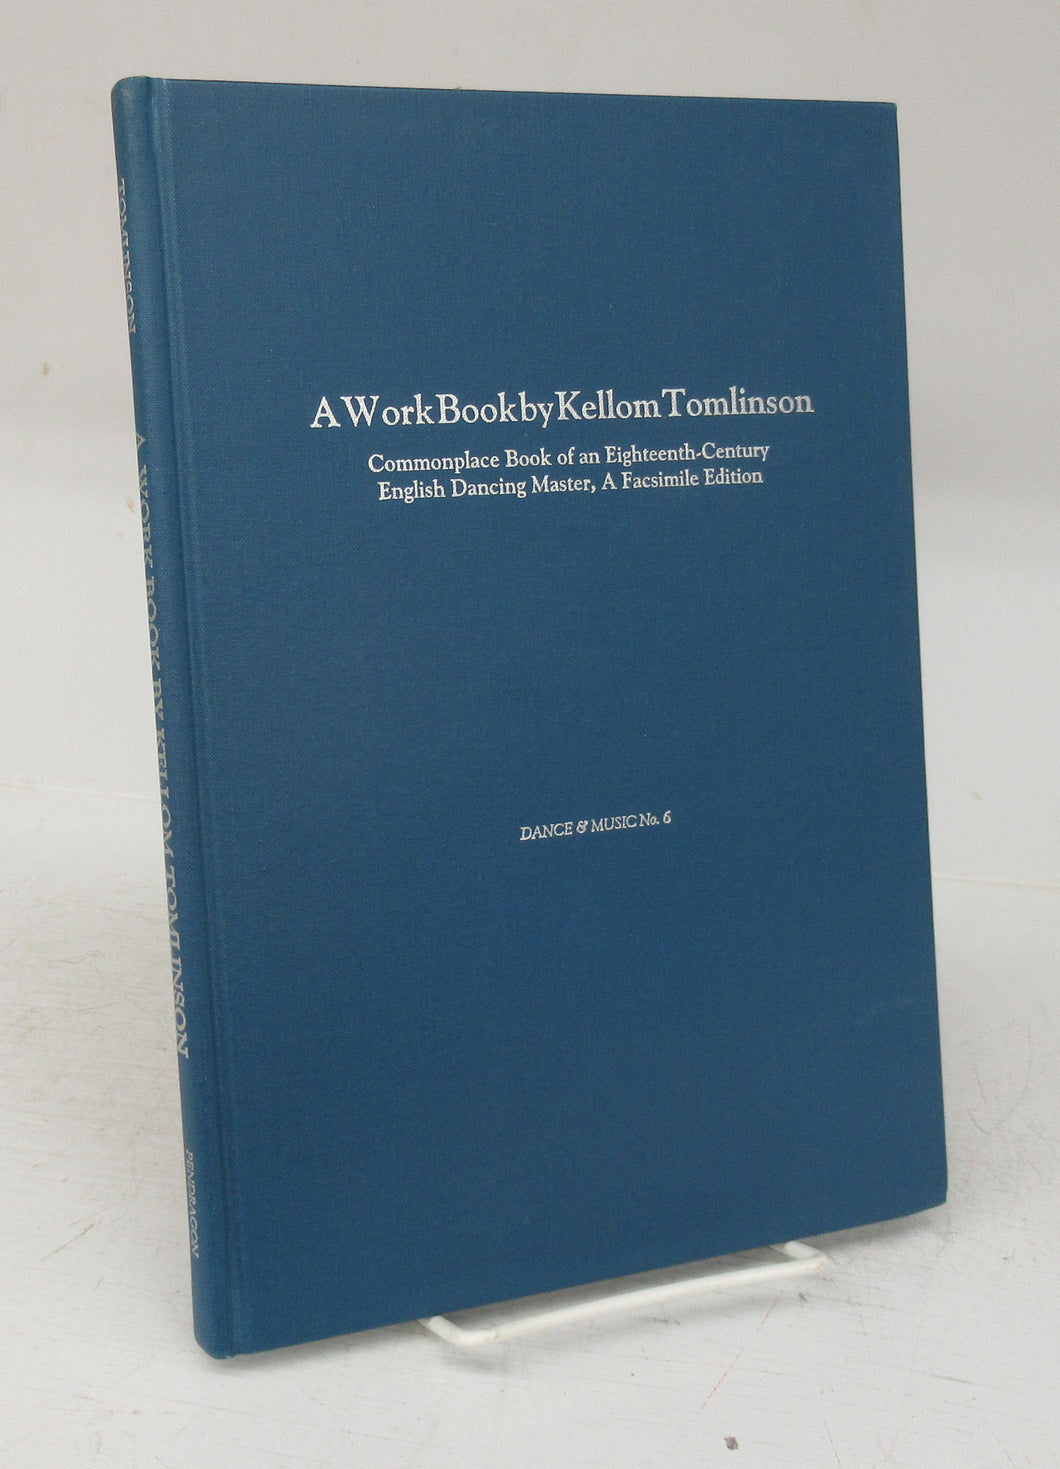 A WorkBook by Kellom Tomlinson: Commonplace Book of an Eighteenth-Century English Dancing Master, A Facsimile Edition